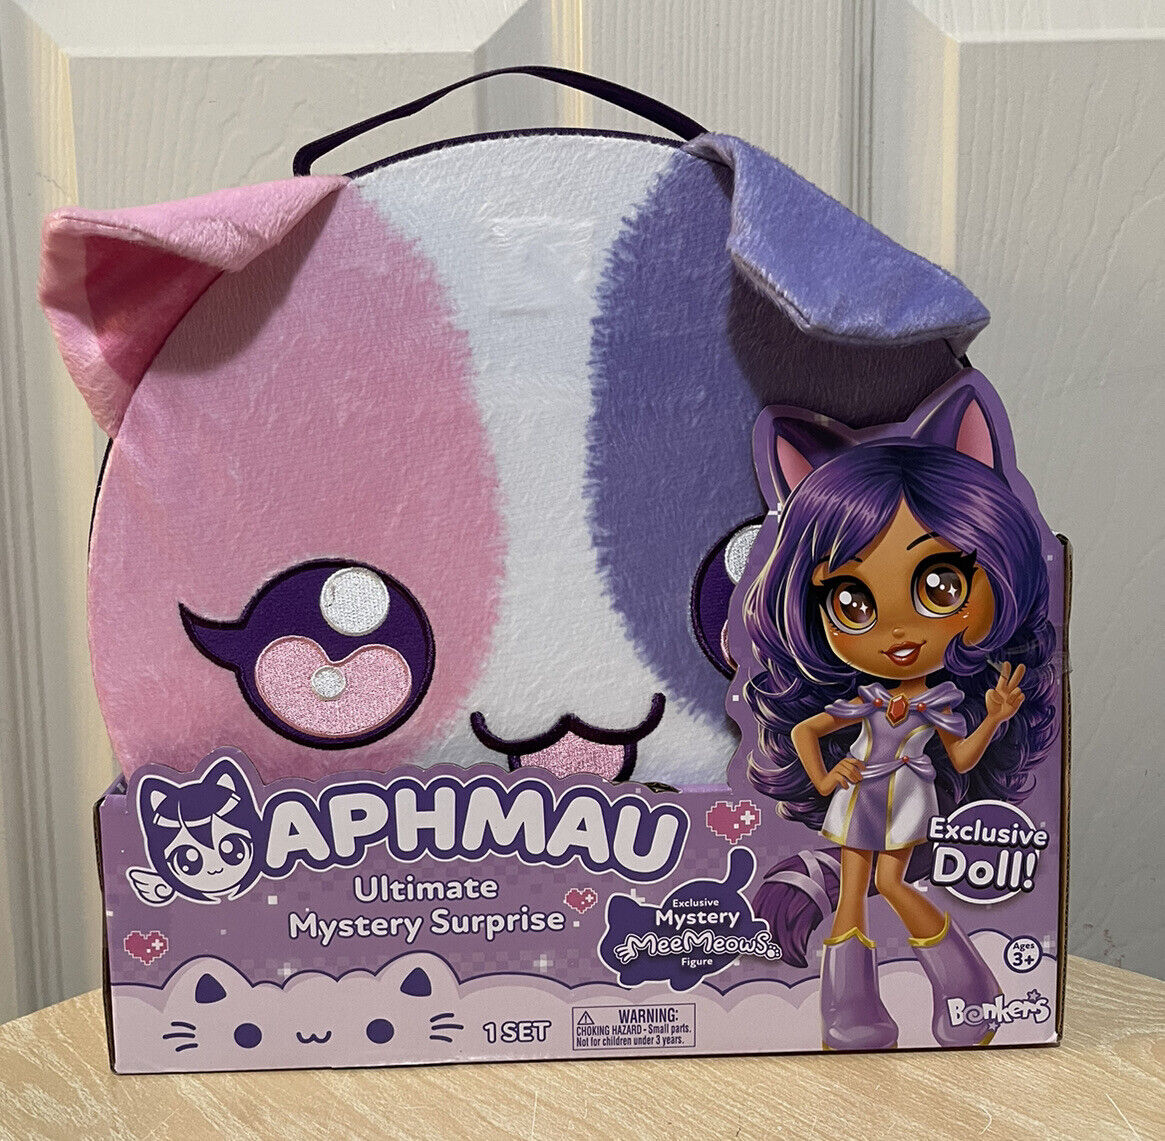 APHMAU Ultimate Mystery Surprise Exclusive Doll And MeeMeows